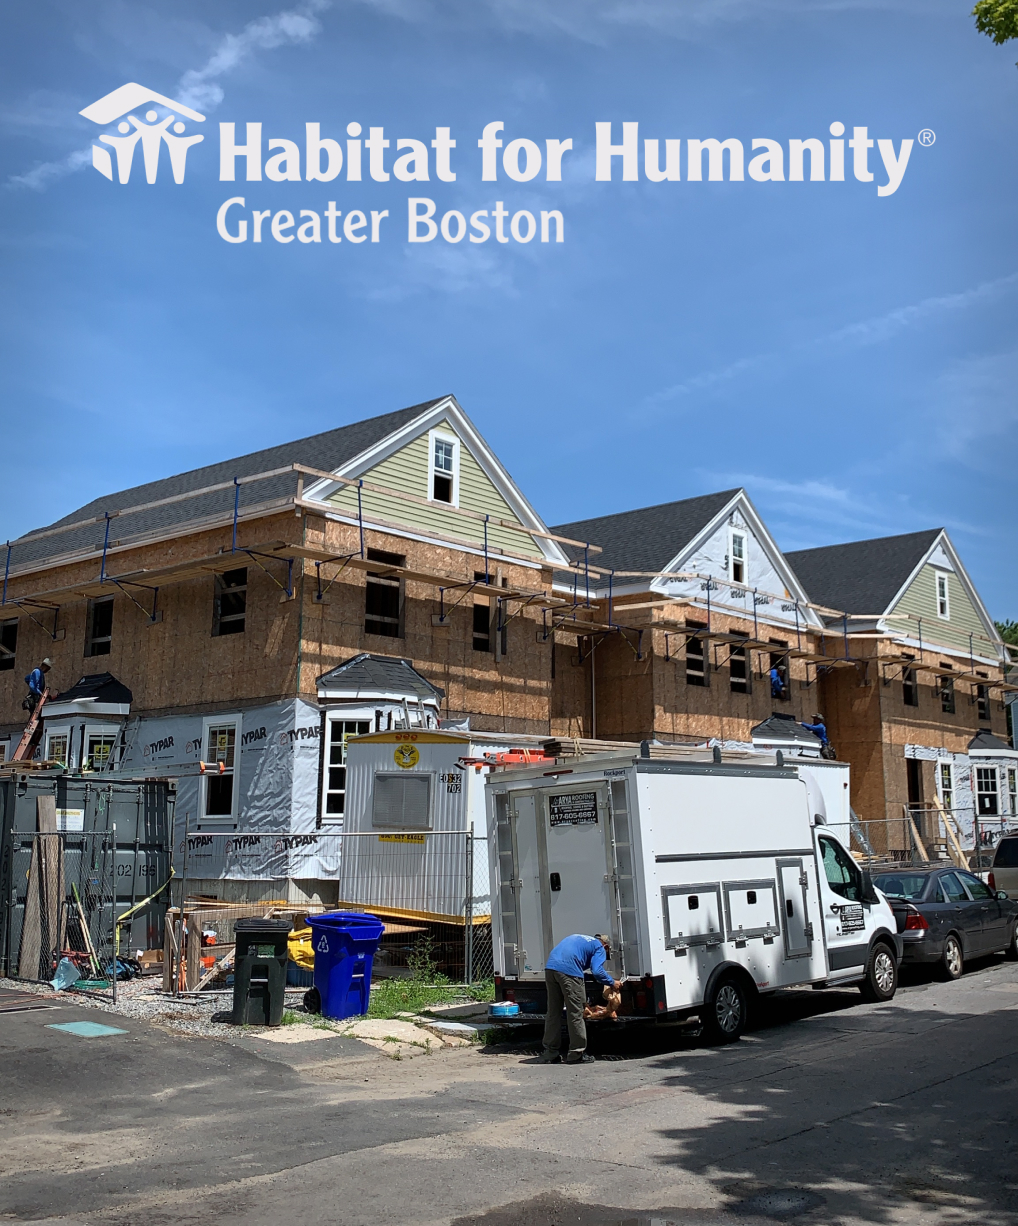 Arya Roofing & Contracting Helping Out the Community We Serve through Habitat for Humanity Greater Boston